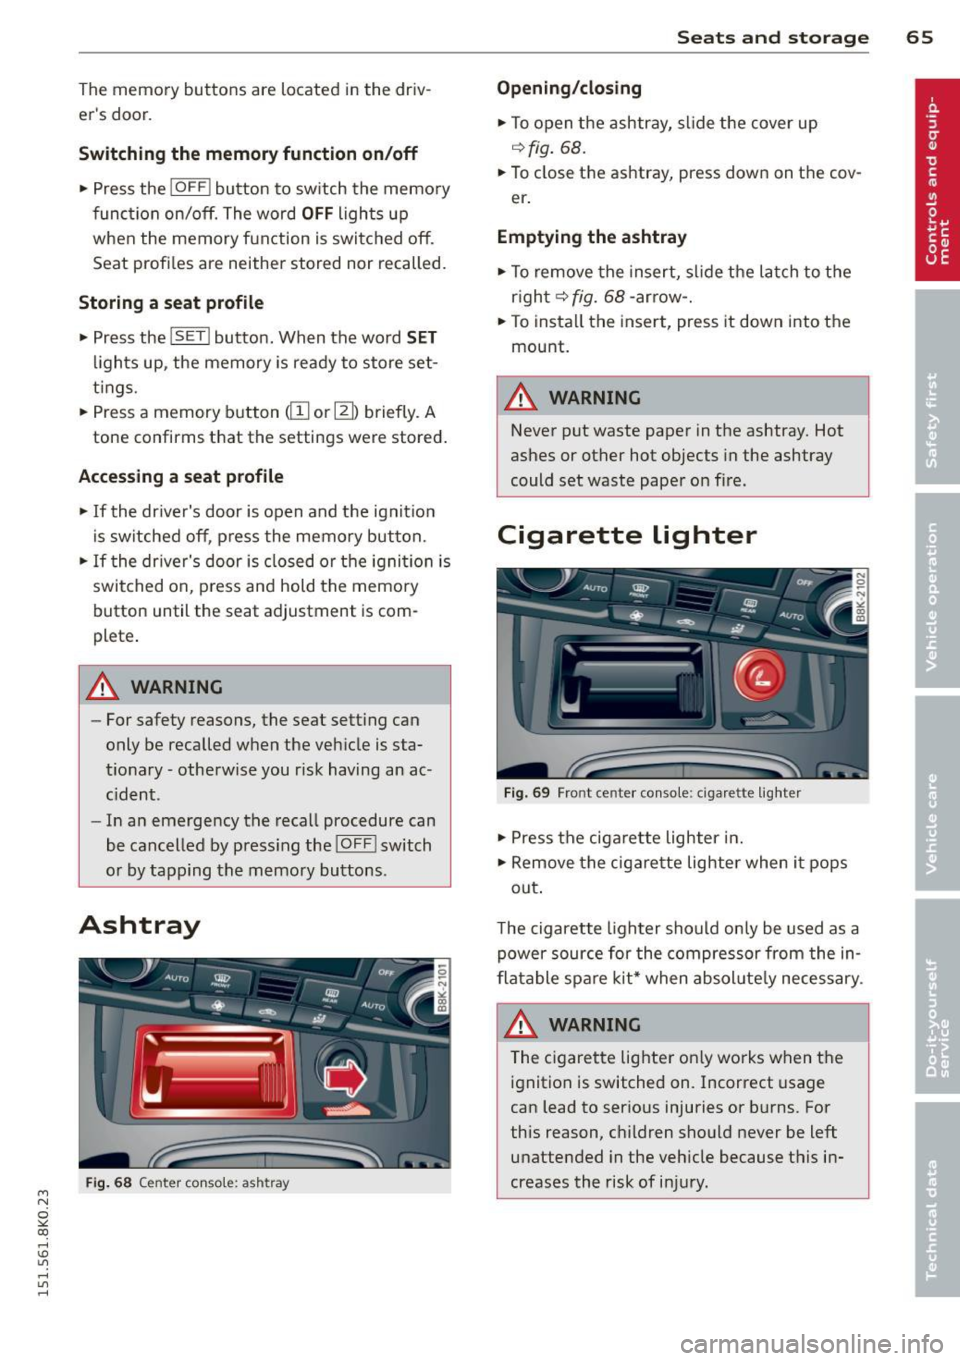 AUDI A4 2015  Owners Manual M N 
~ co 
rl I.O 
" rl 
" rl 
The  memory  buttons  are  located  in the  driv­
ers  door. 
Switching  the  memory function on/off 
• Press  the !OFF ! button  to  switch  the  memory 
function